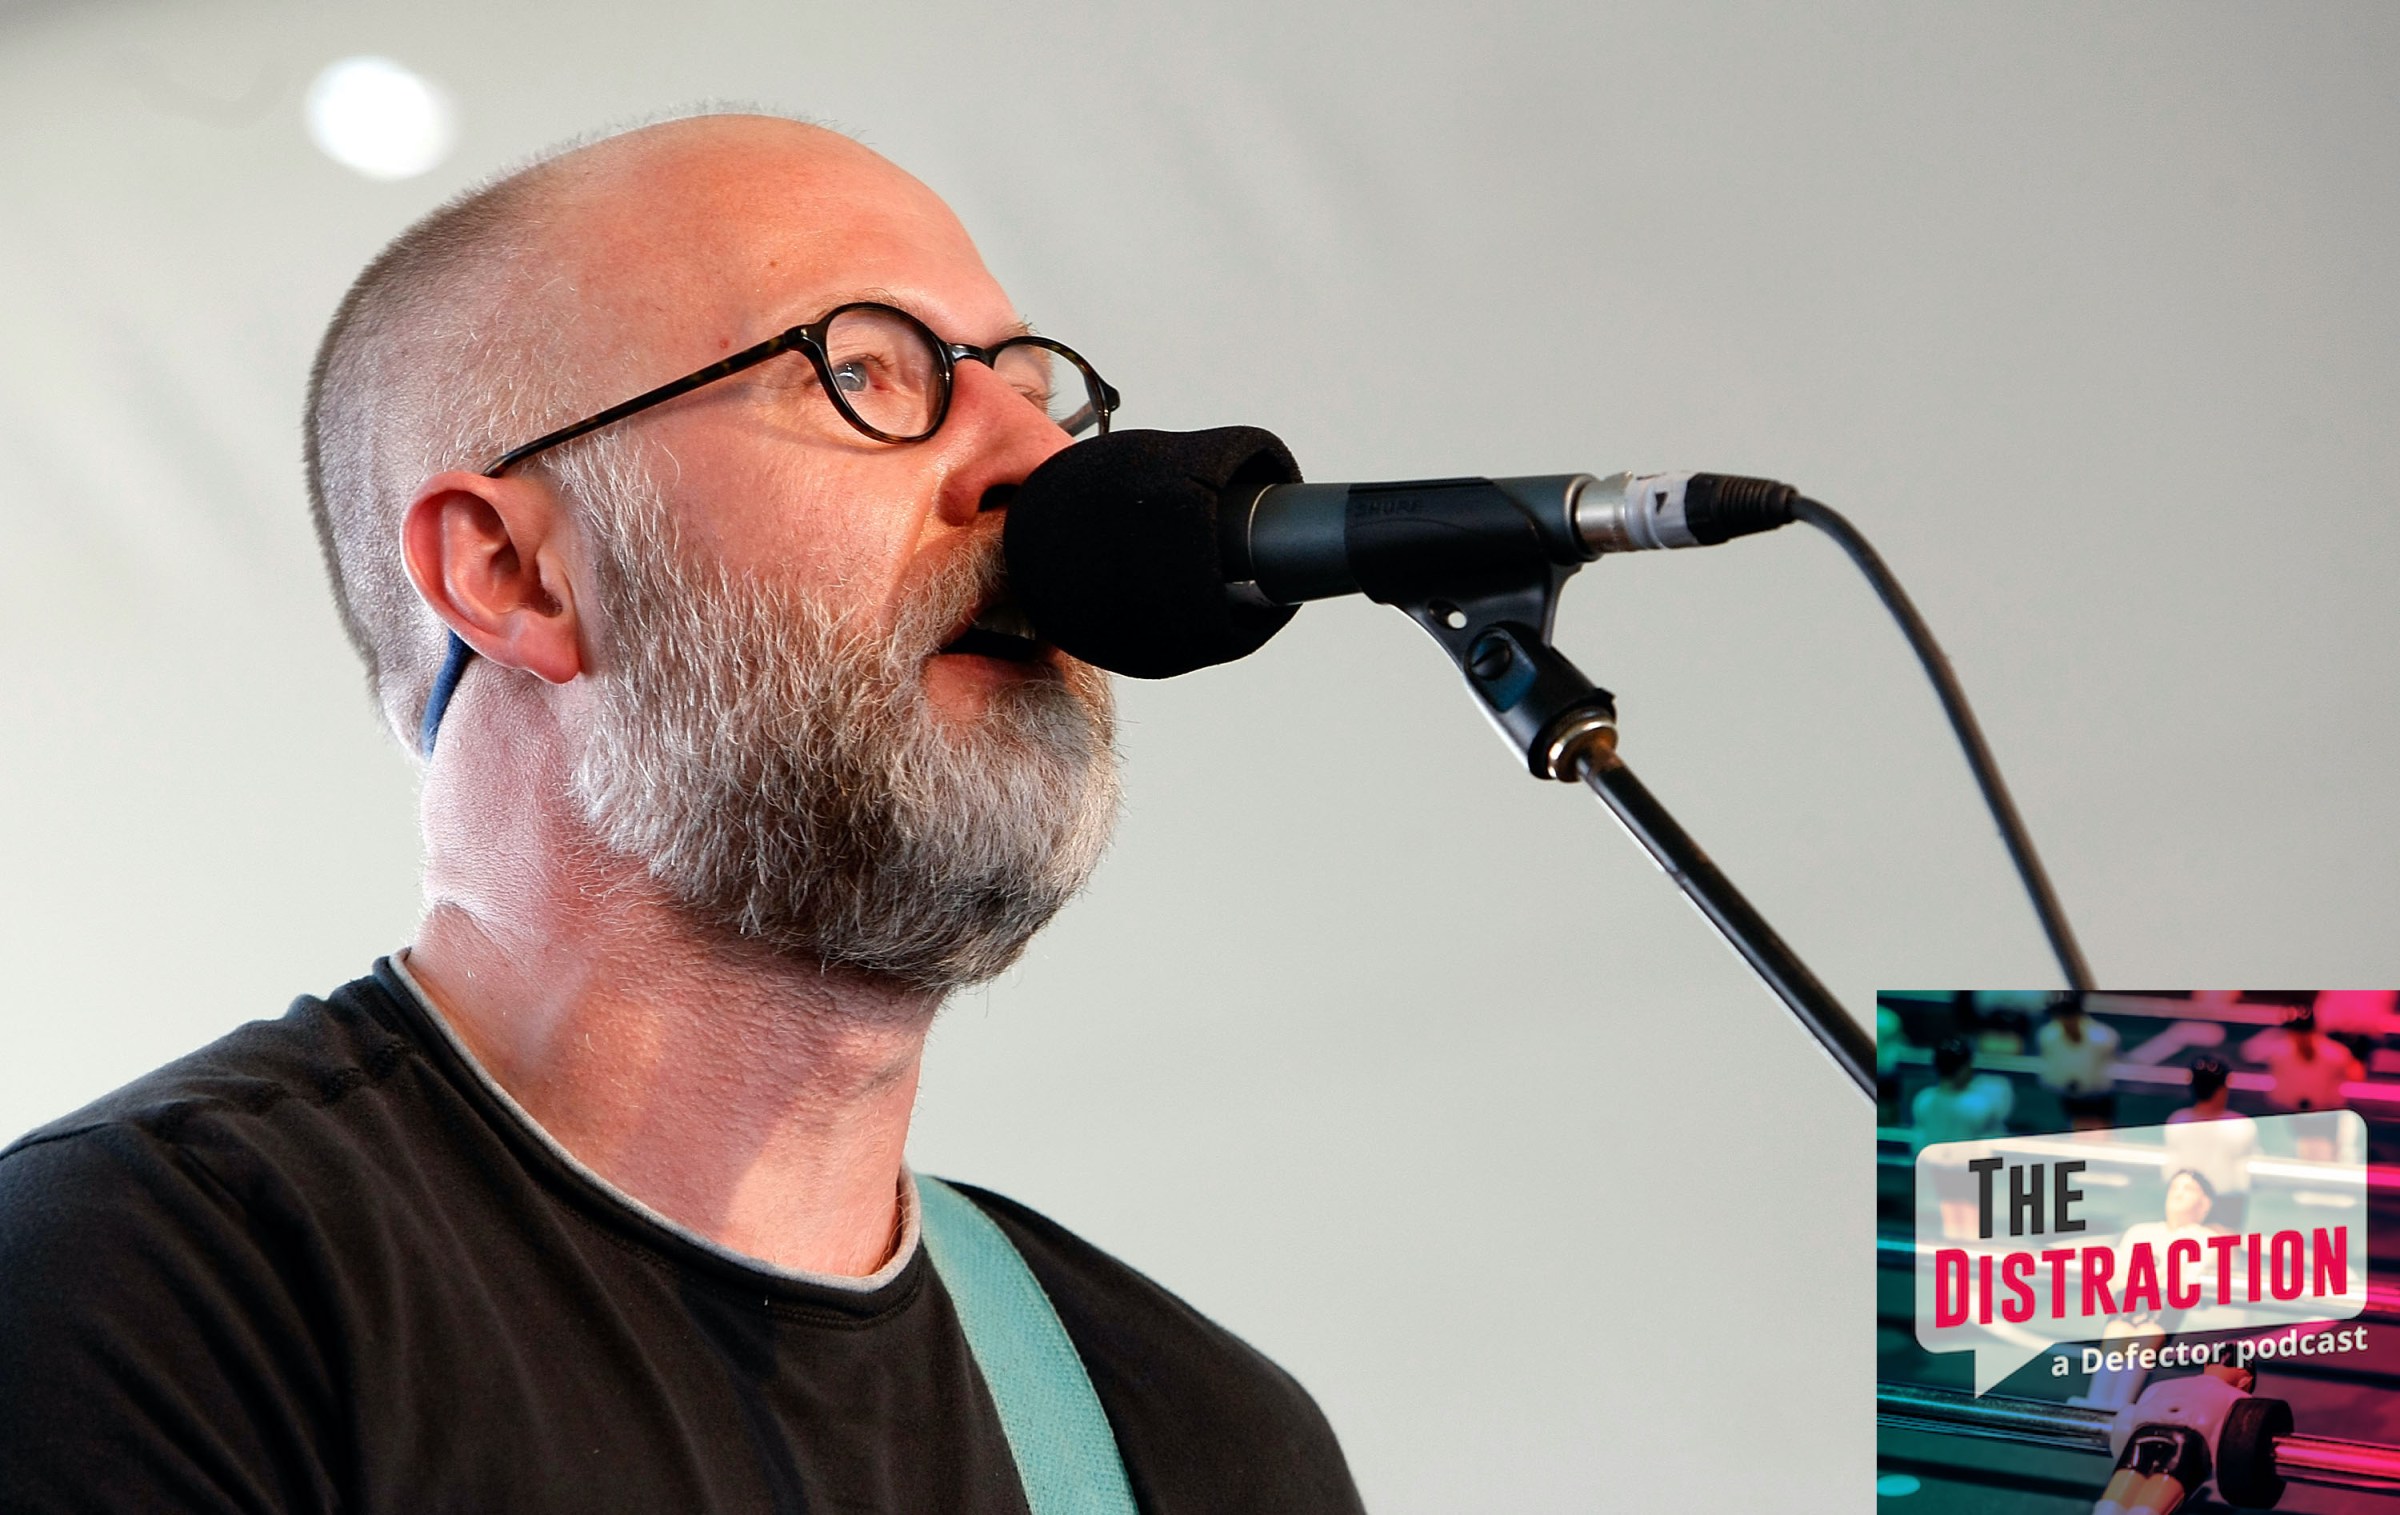 Bob Mould, pictured here not appearing on this podcast but rather performing at Coachella.